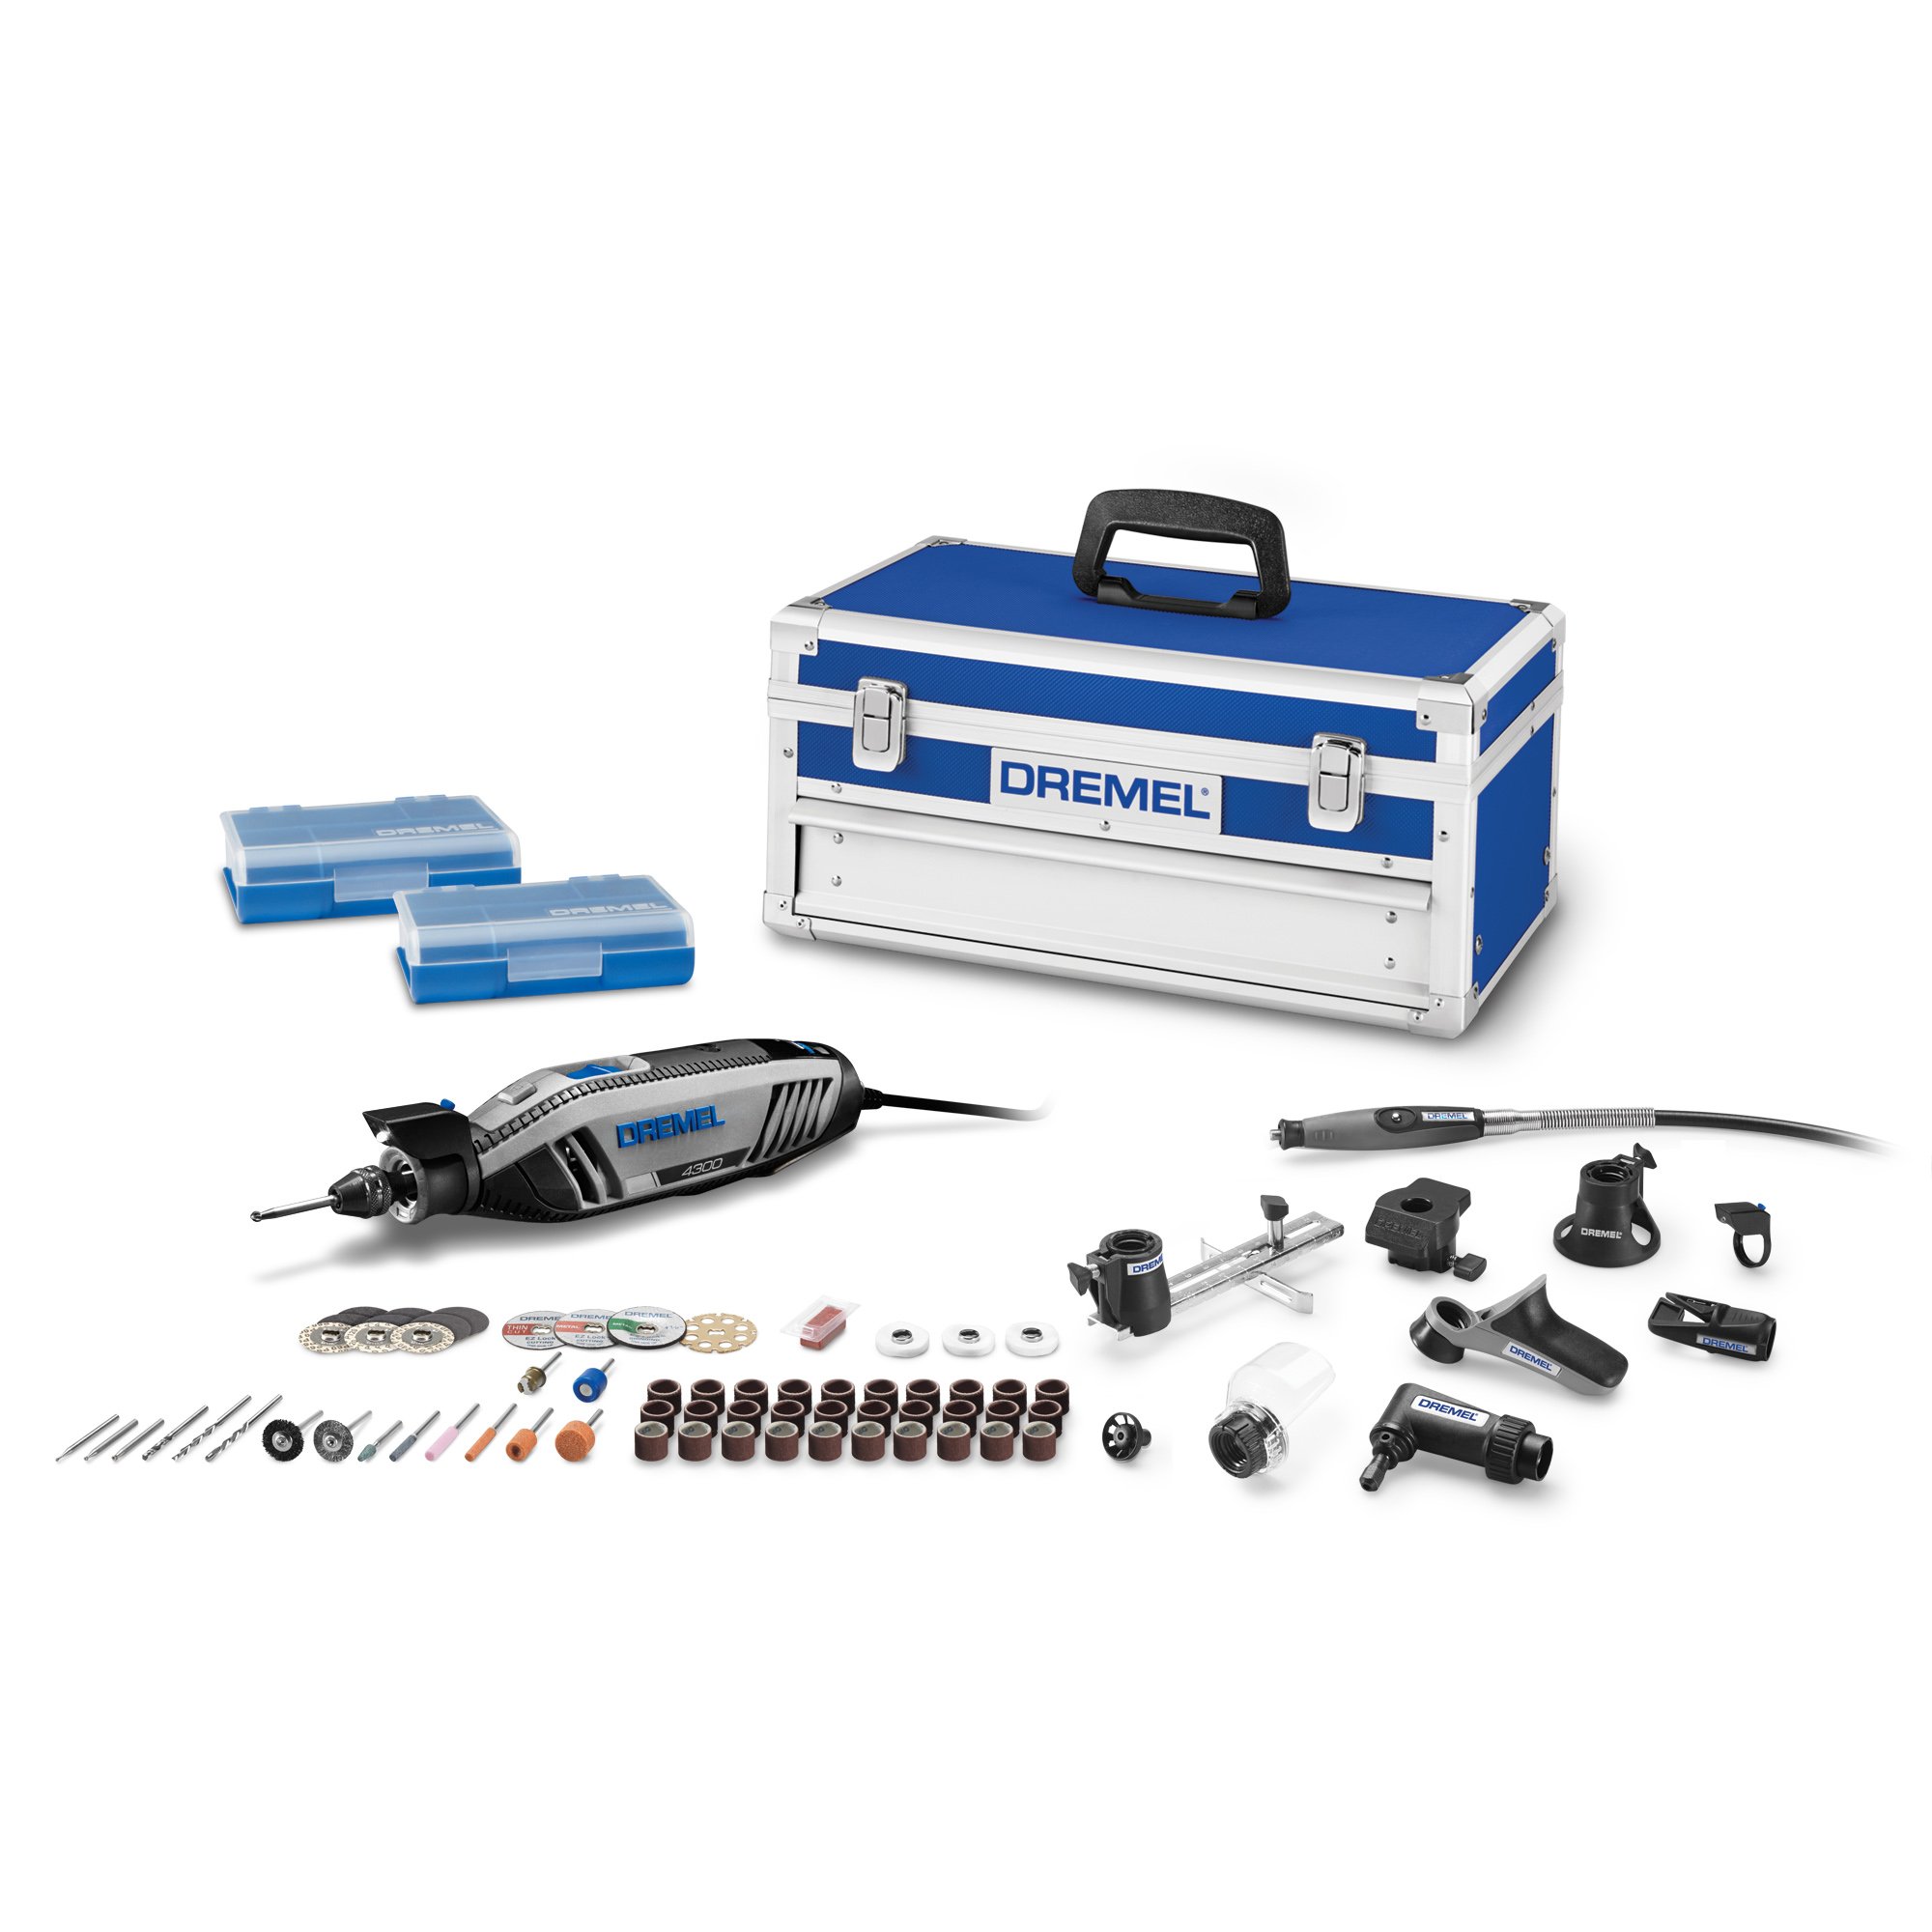 Dremel 4300-9/64 Rotary Tool Kit with Flex Shaft- 9 Attachments & 64 Accessories- Engraver, Router, Sander, and Polisher & 231 Portable Rotary Tool Shaper and Router Table- Woodworking Attachment